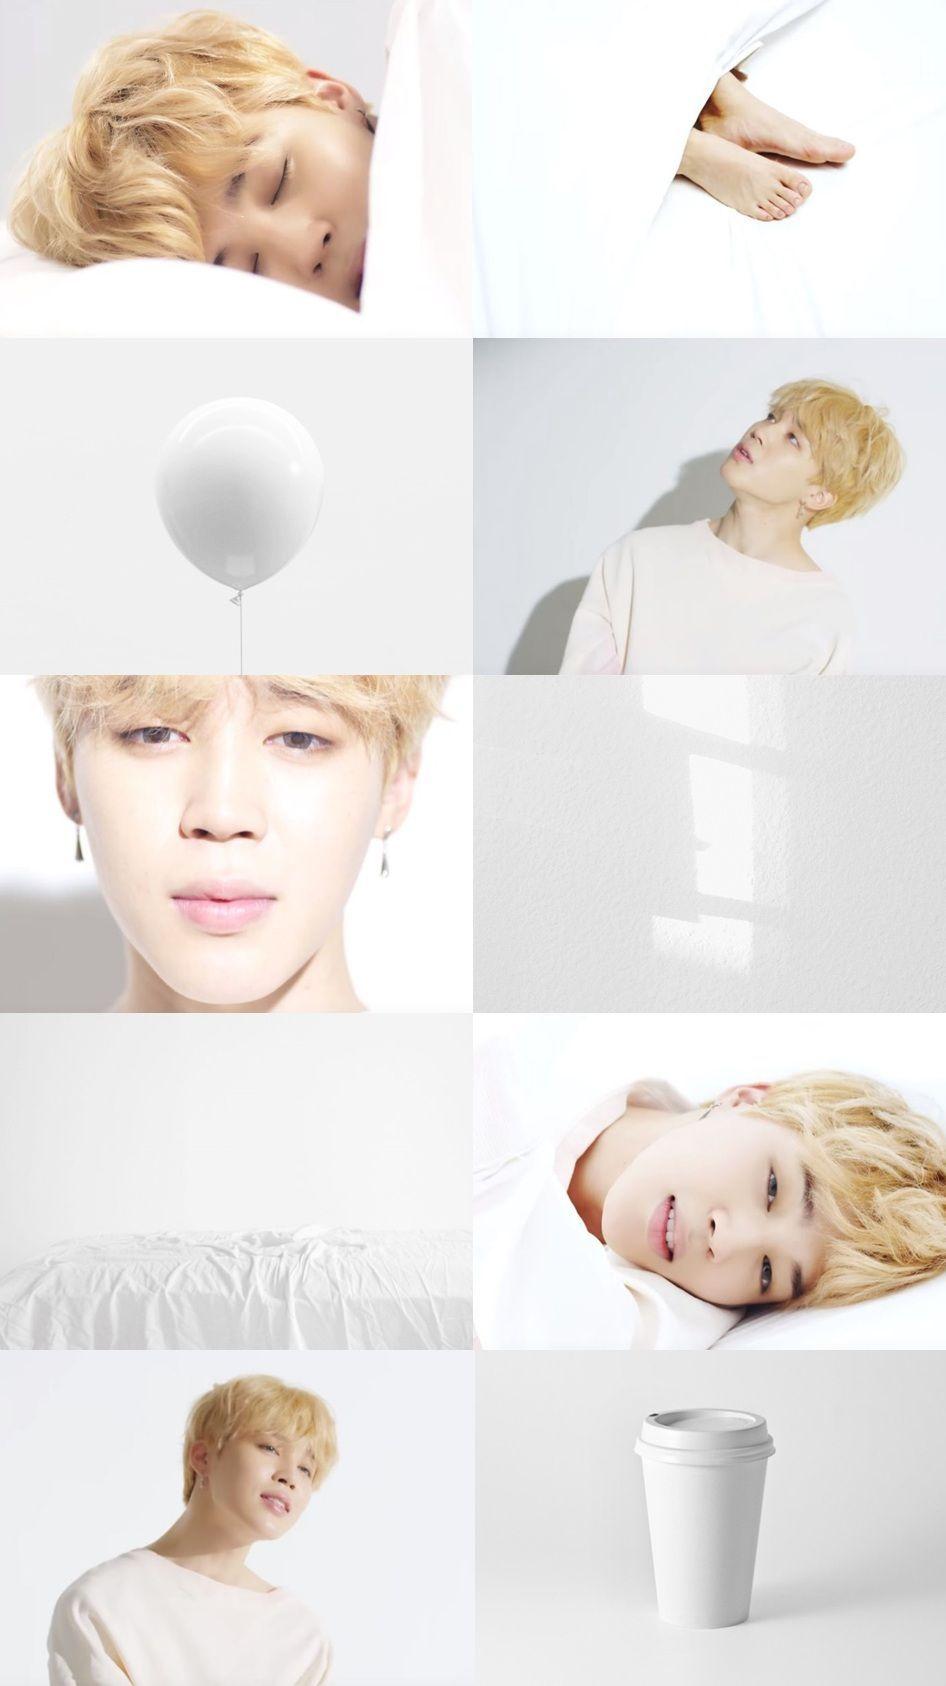 A collage of photos of Jimin from BTS in a white shirt and no shirt. - Jimin